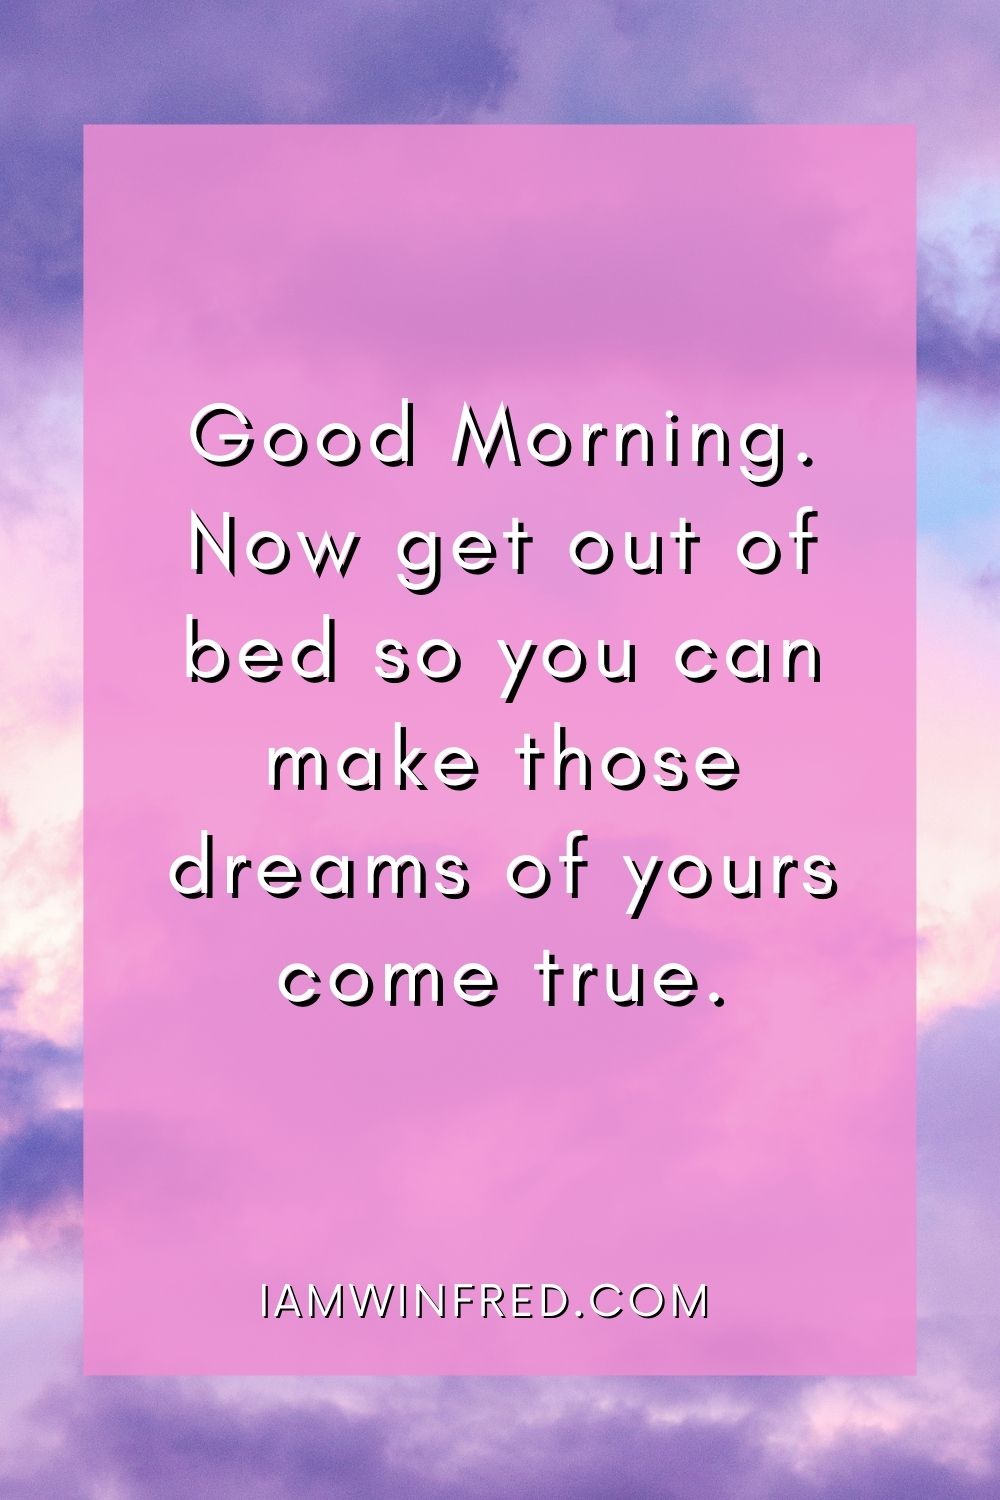 Good Morning. Now Get Out Of Bed So You Can Make Those Dreams Of Yours Come True.